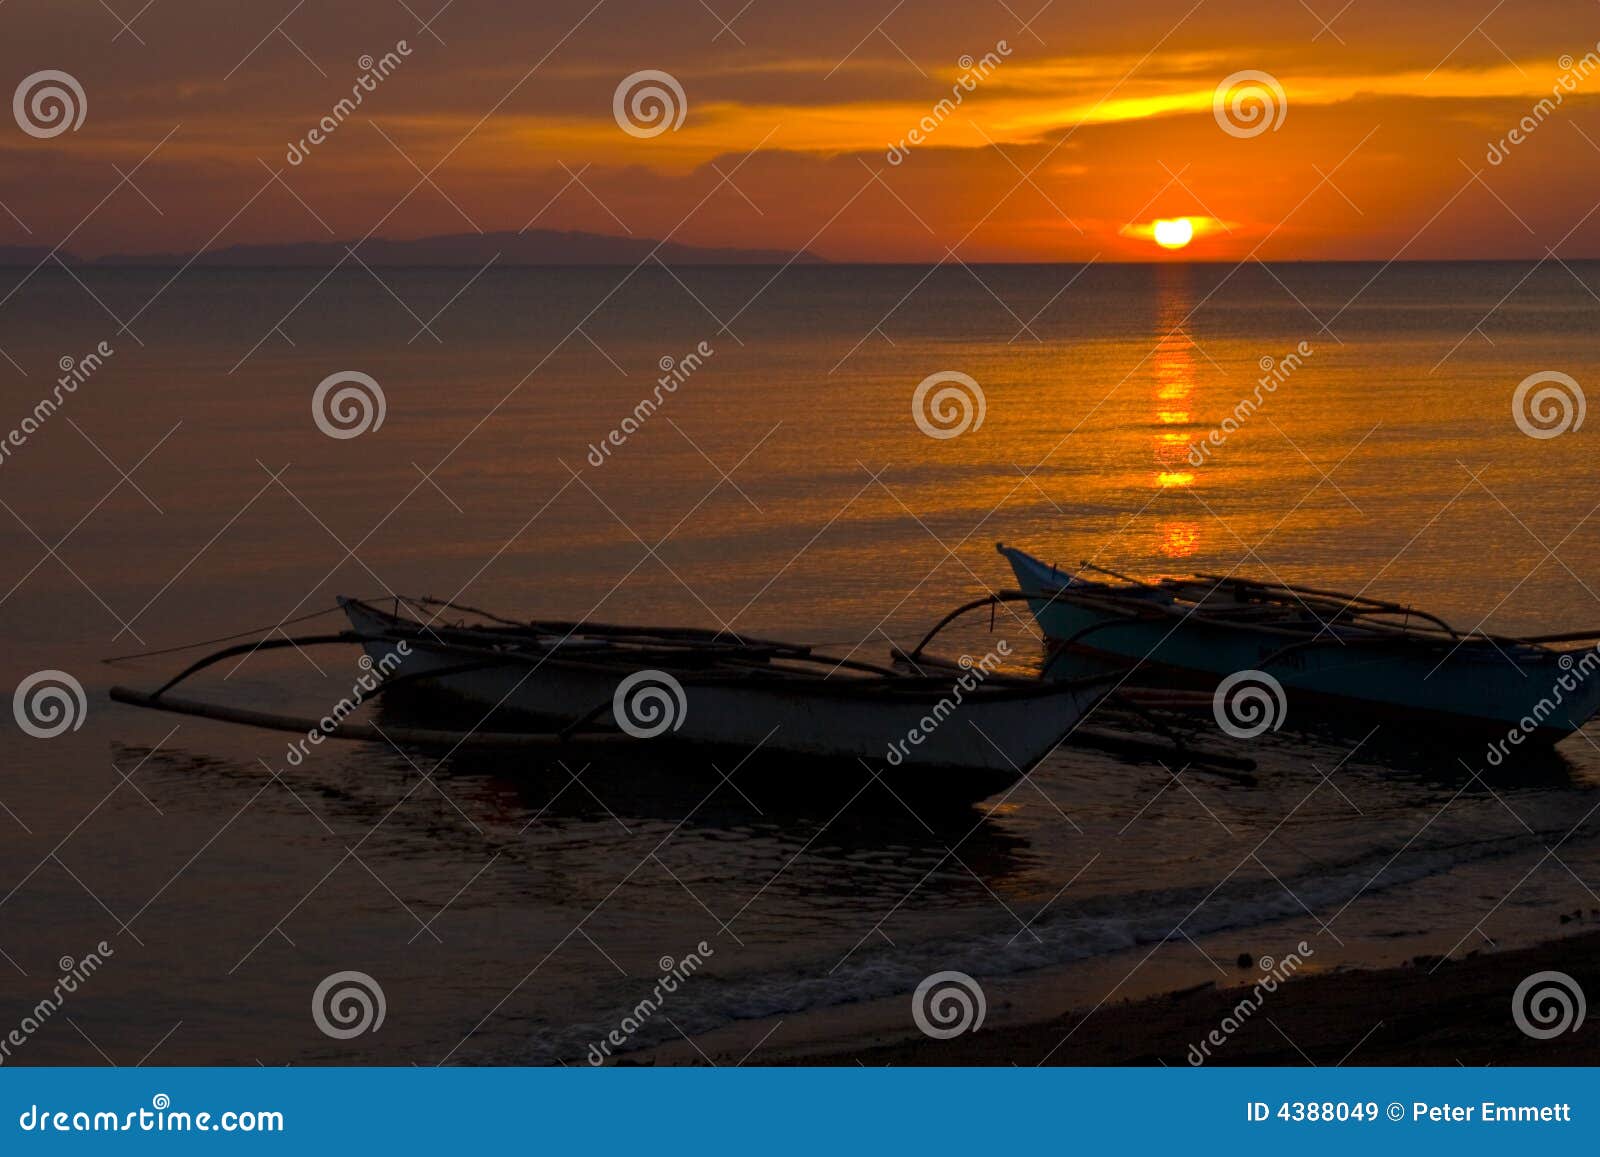 banca boats at sunset on beach